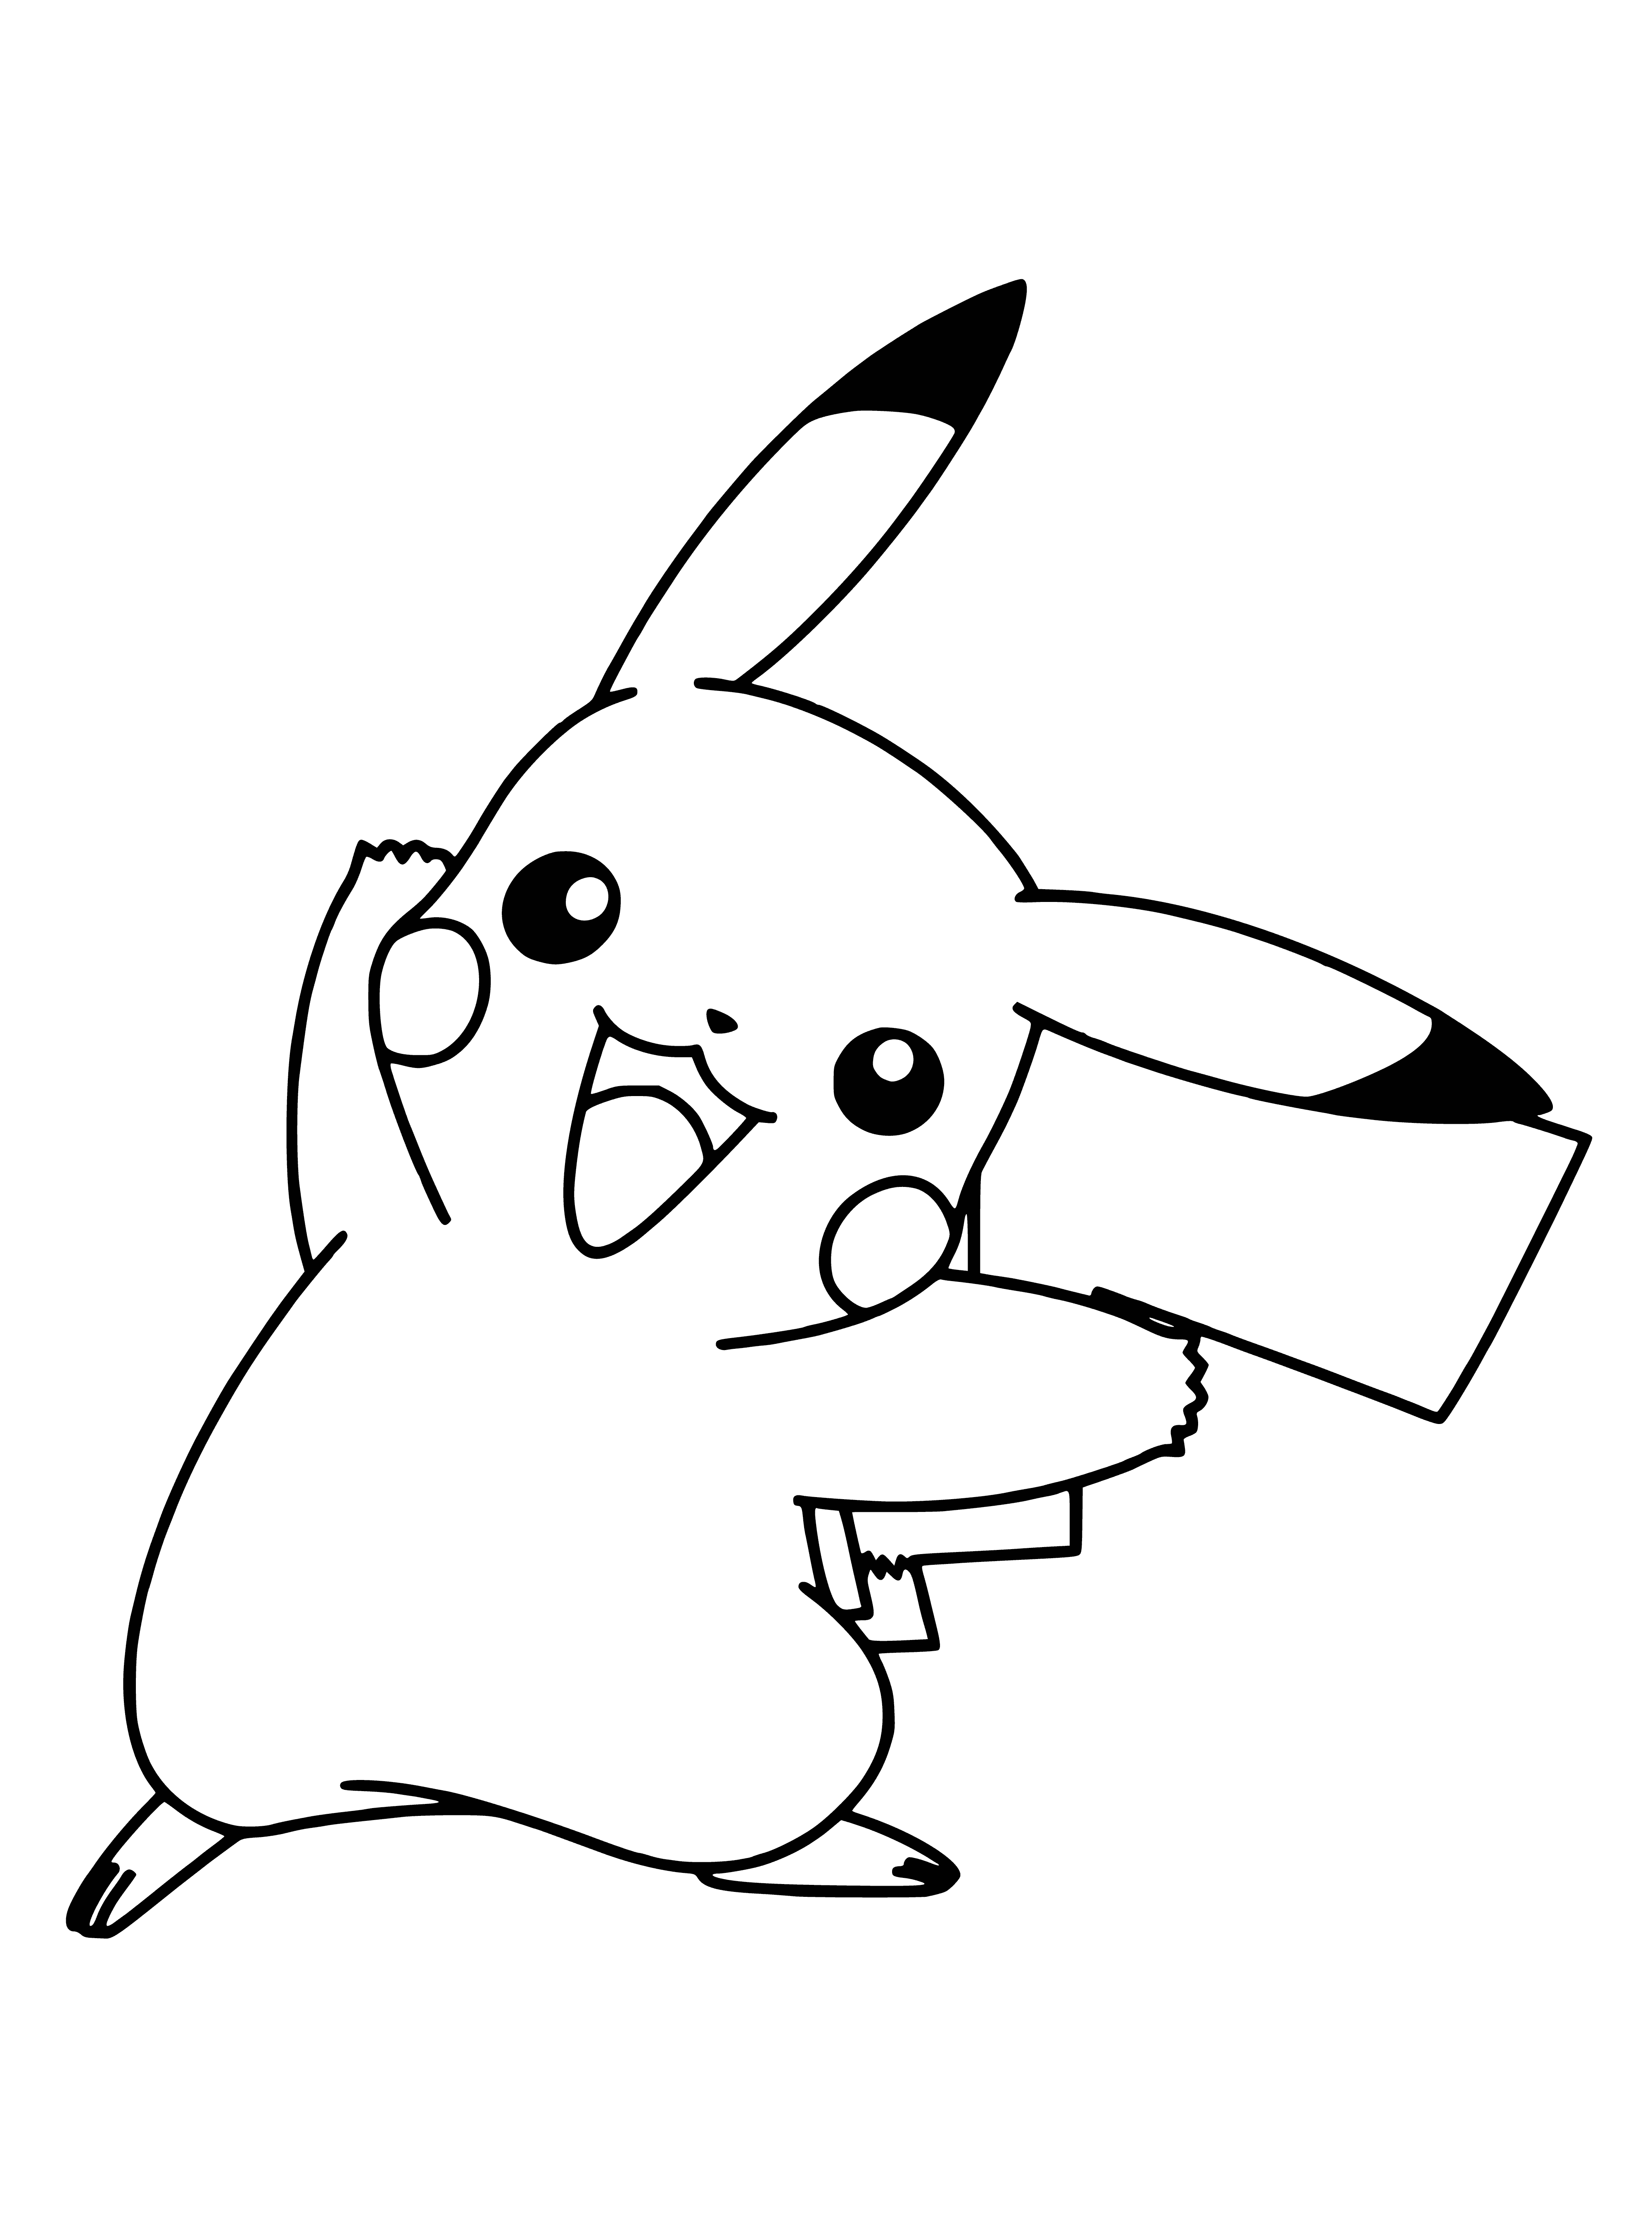 coloring page: An adorable Pikachu, a small yellow Pokemon with black markings and red cheeks, has brown tail and big black eyes.